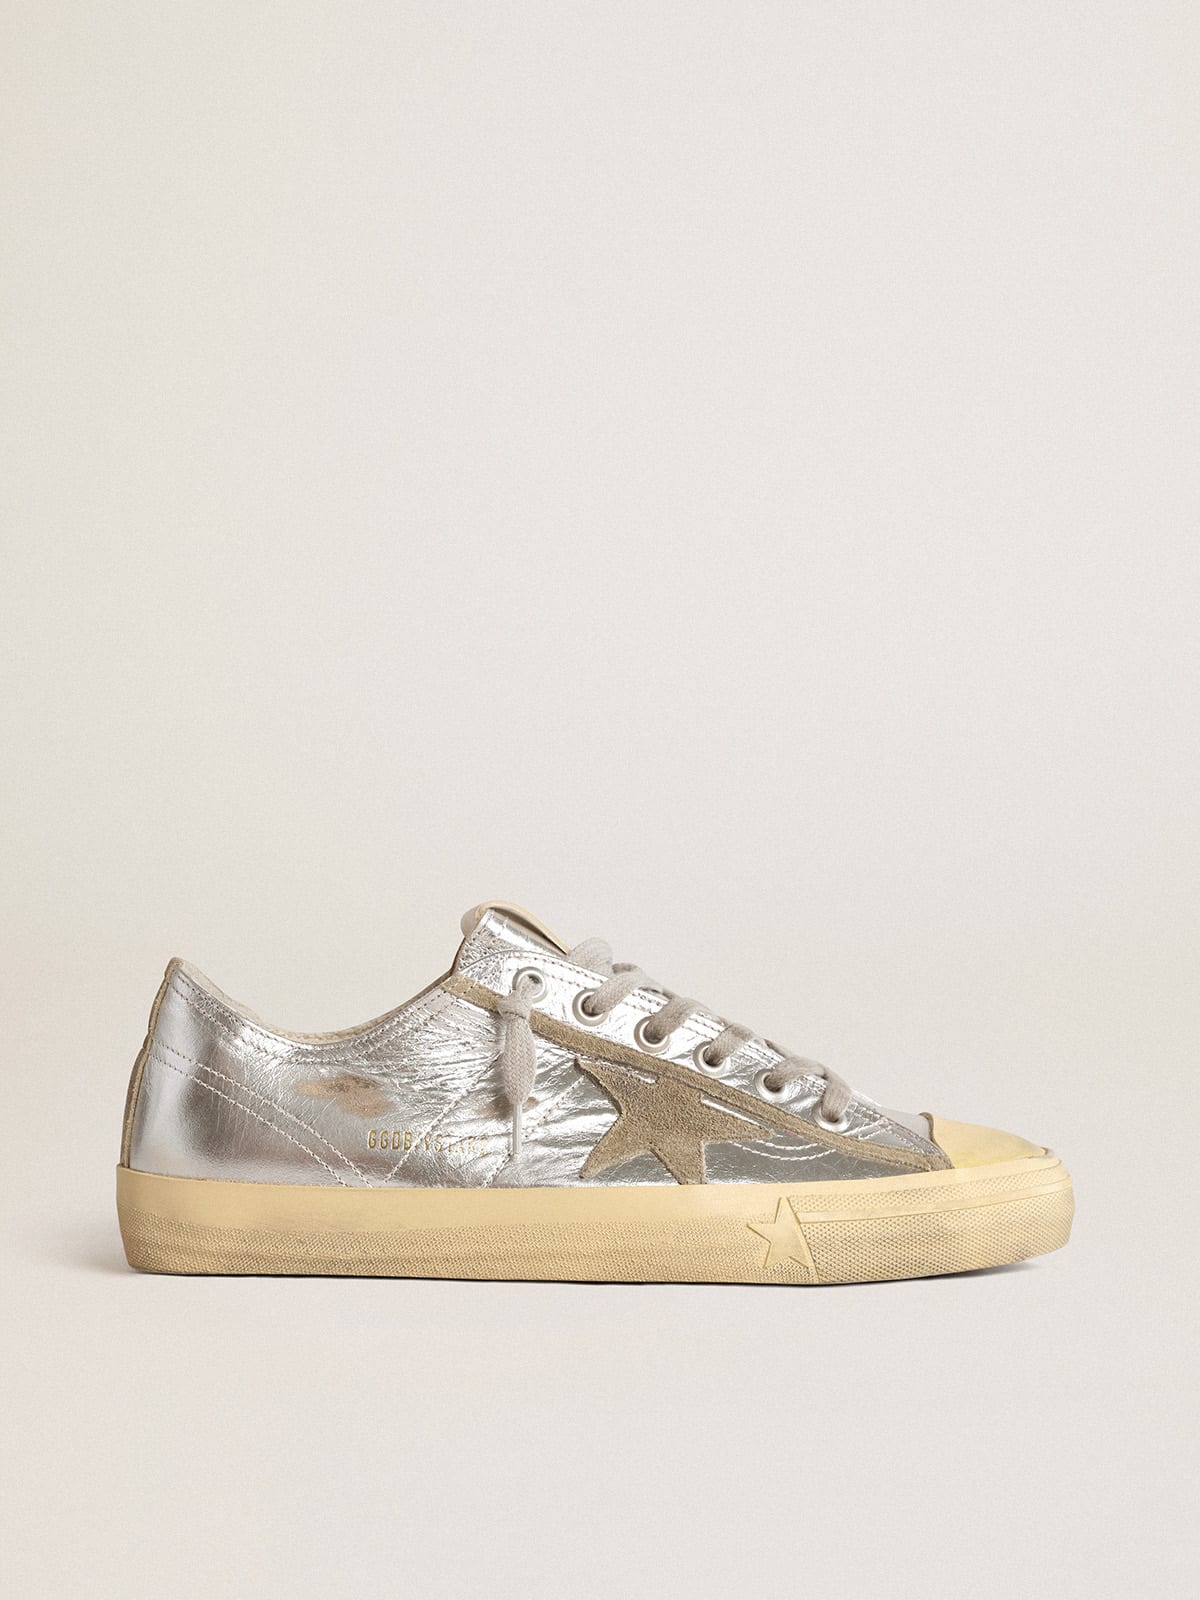 Men's V-Star LTD sneakers in silver metallic leather with star in ice-gray suede